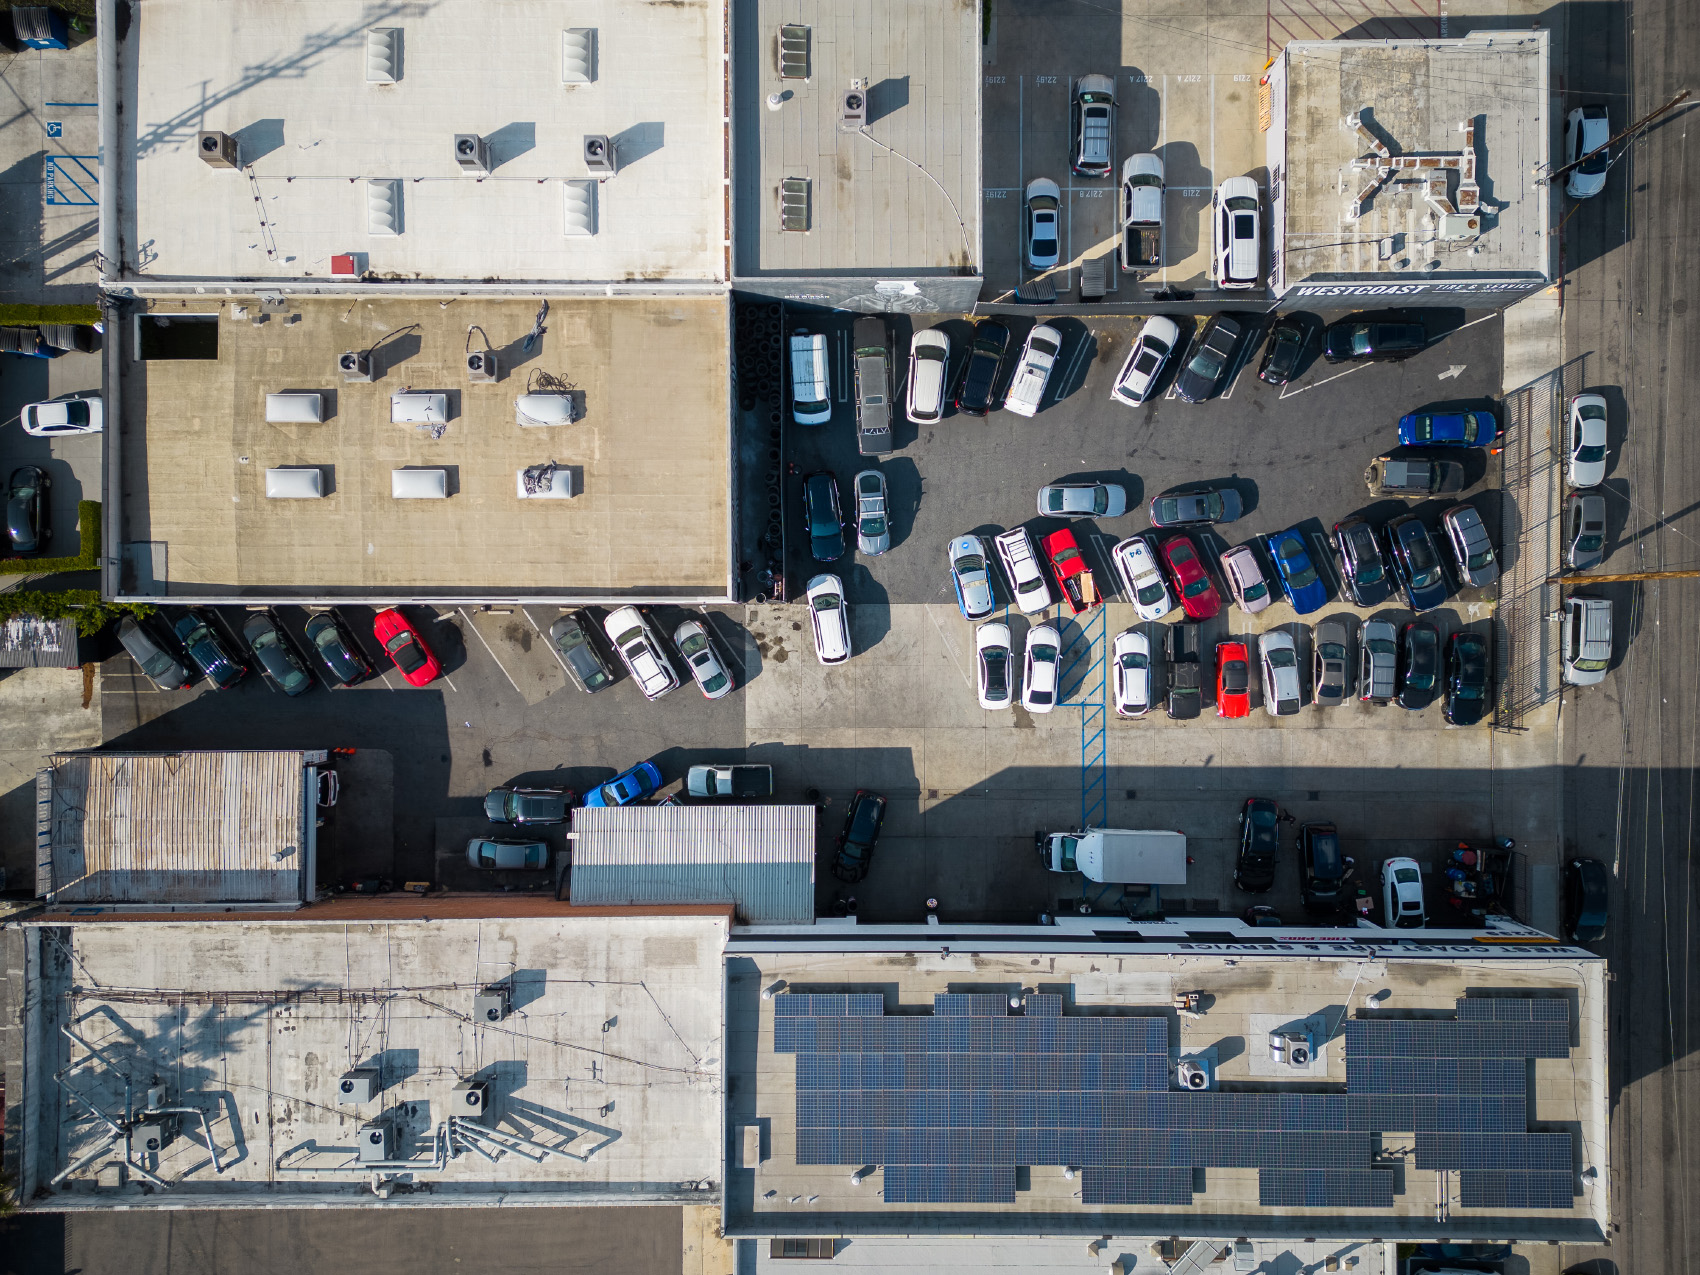 A bird's eye view of our Los Angeles location